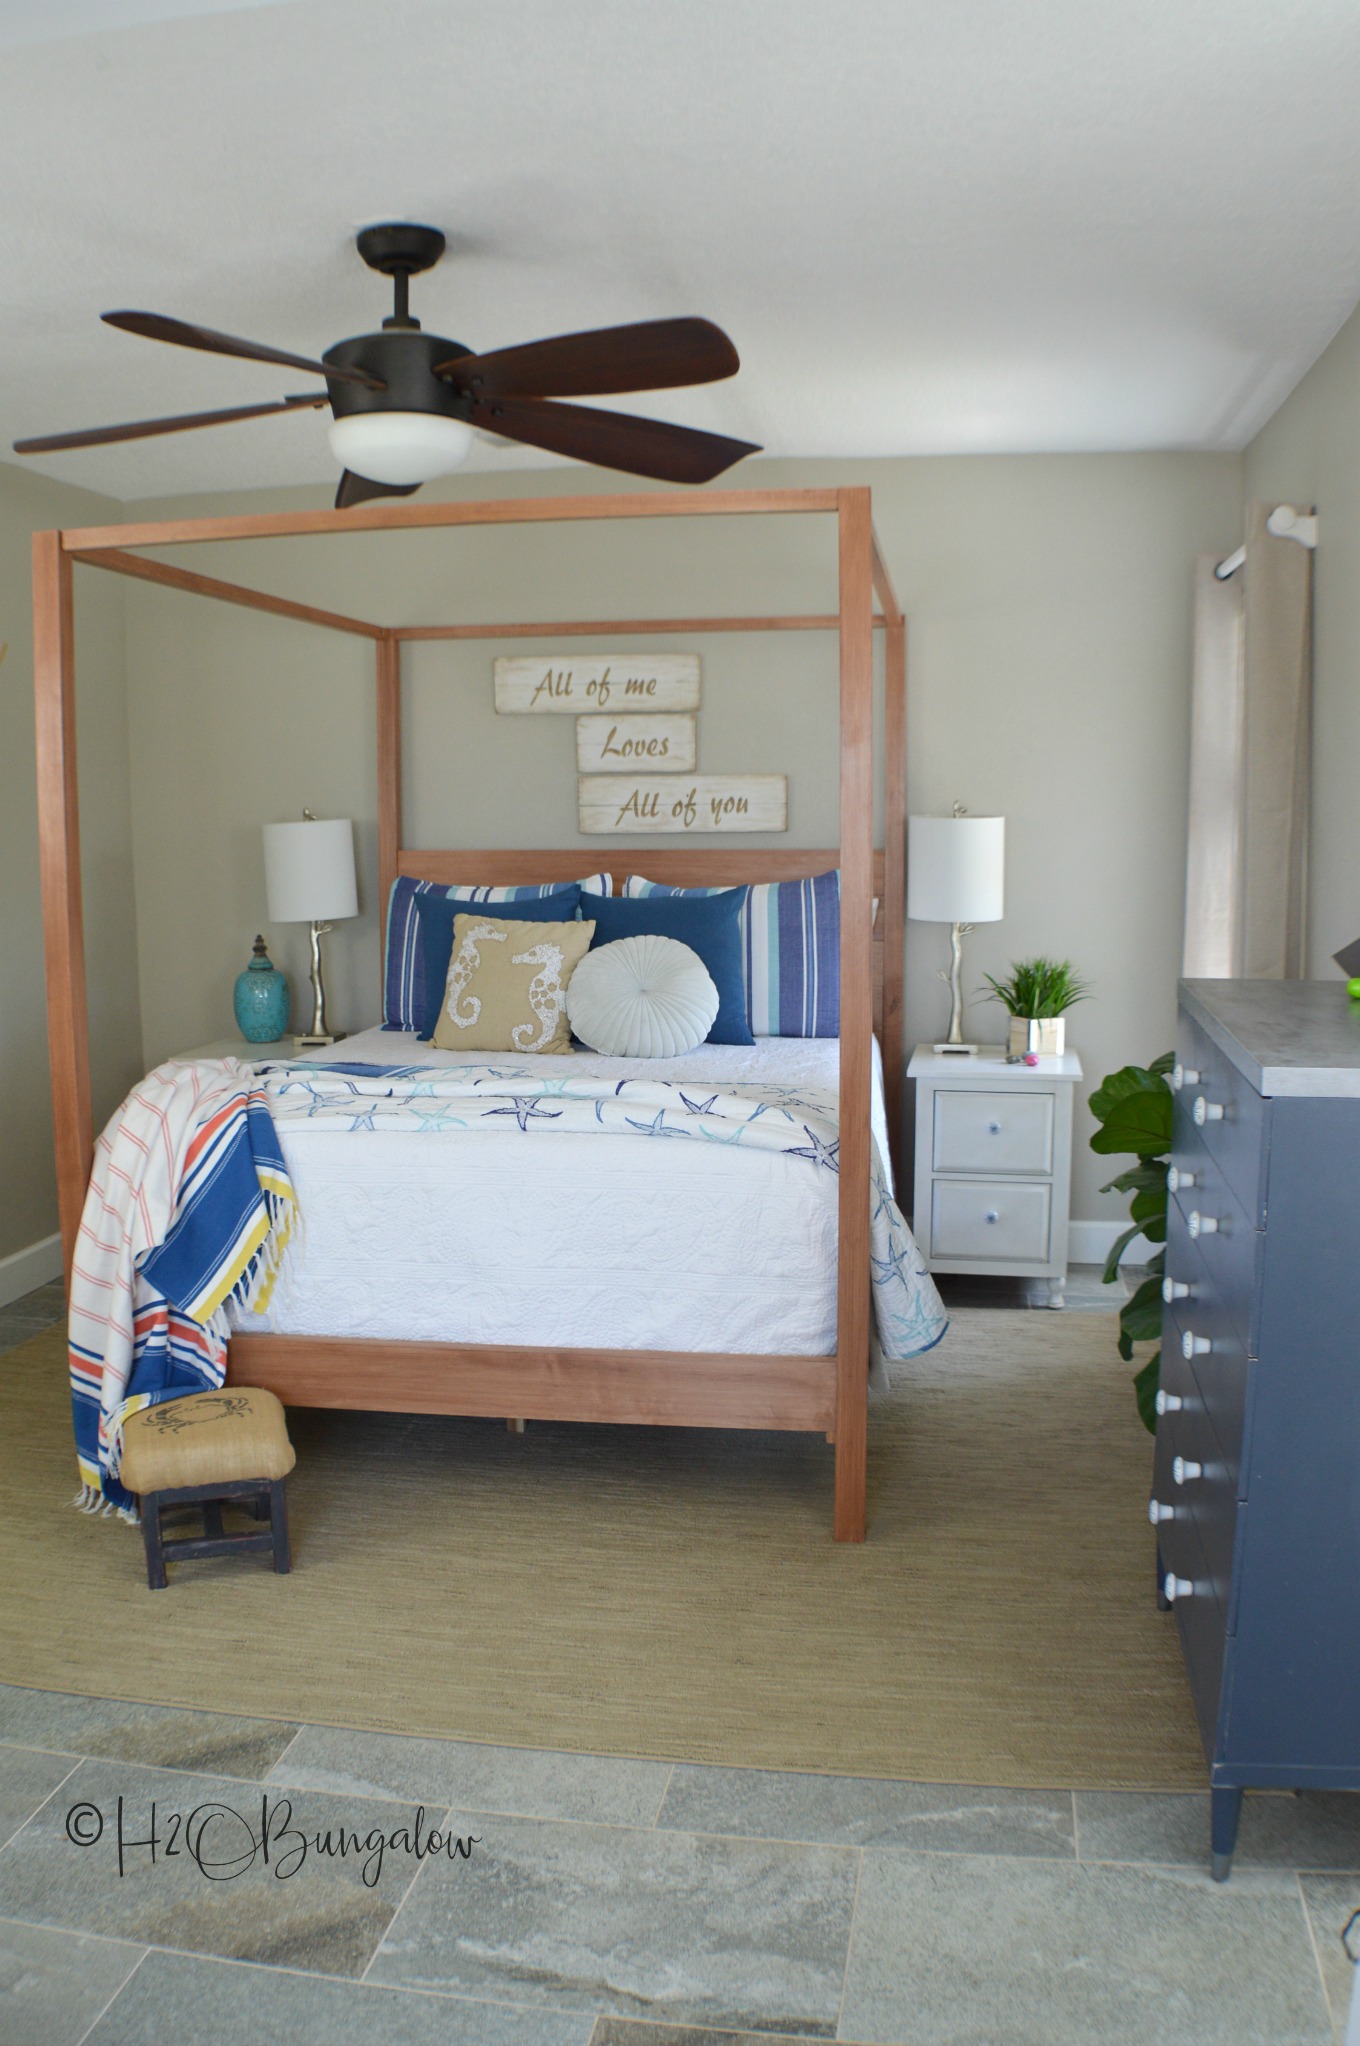 I'm so excited to share my modern coastal bedroom makeover with you guys today!  It's actually more of a redecorating bedroom refresh than a full blown makeover.  But, by changing the color palette,  adding a huge scrumptiously textured area rug and and few creative decor pieces it has the look of a whole new room.  This modern coastal bedroom makeover is fresh and contemporary while being warm and inviting.  Which is everything I'd want in a bedroom retreat.